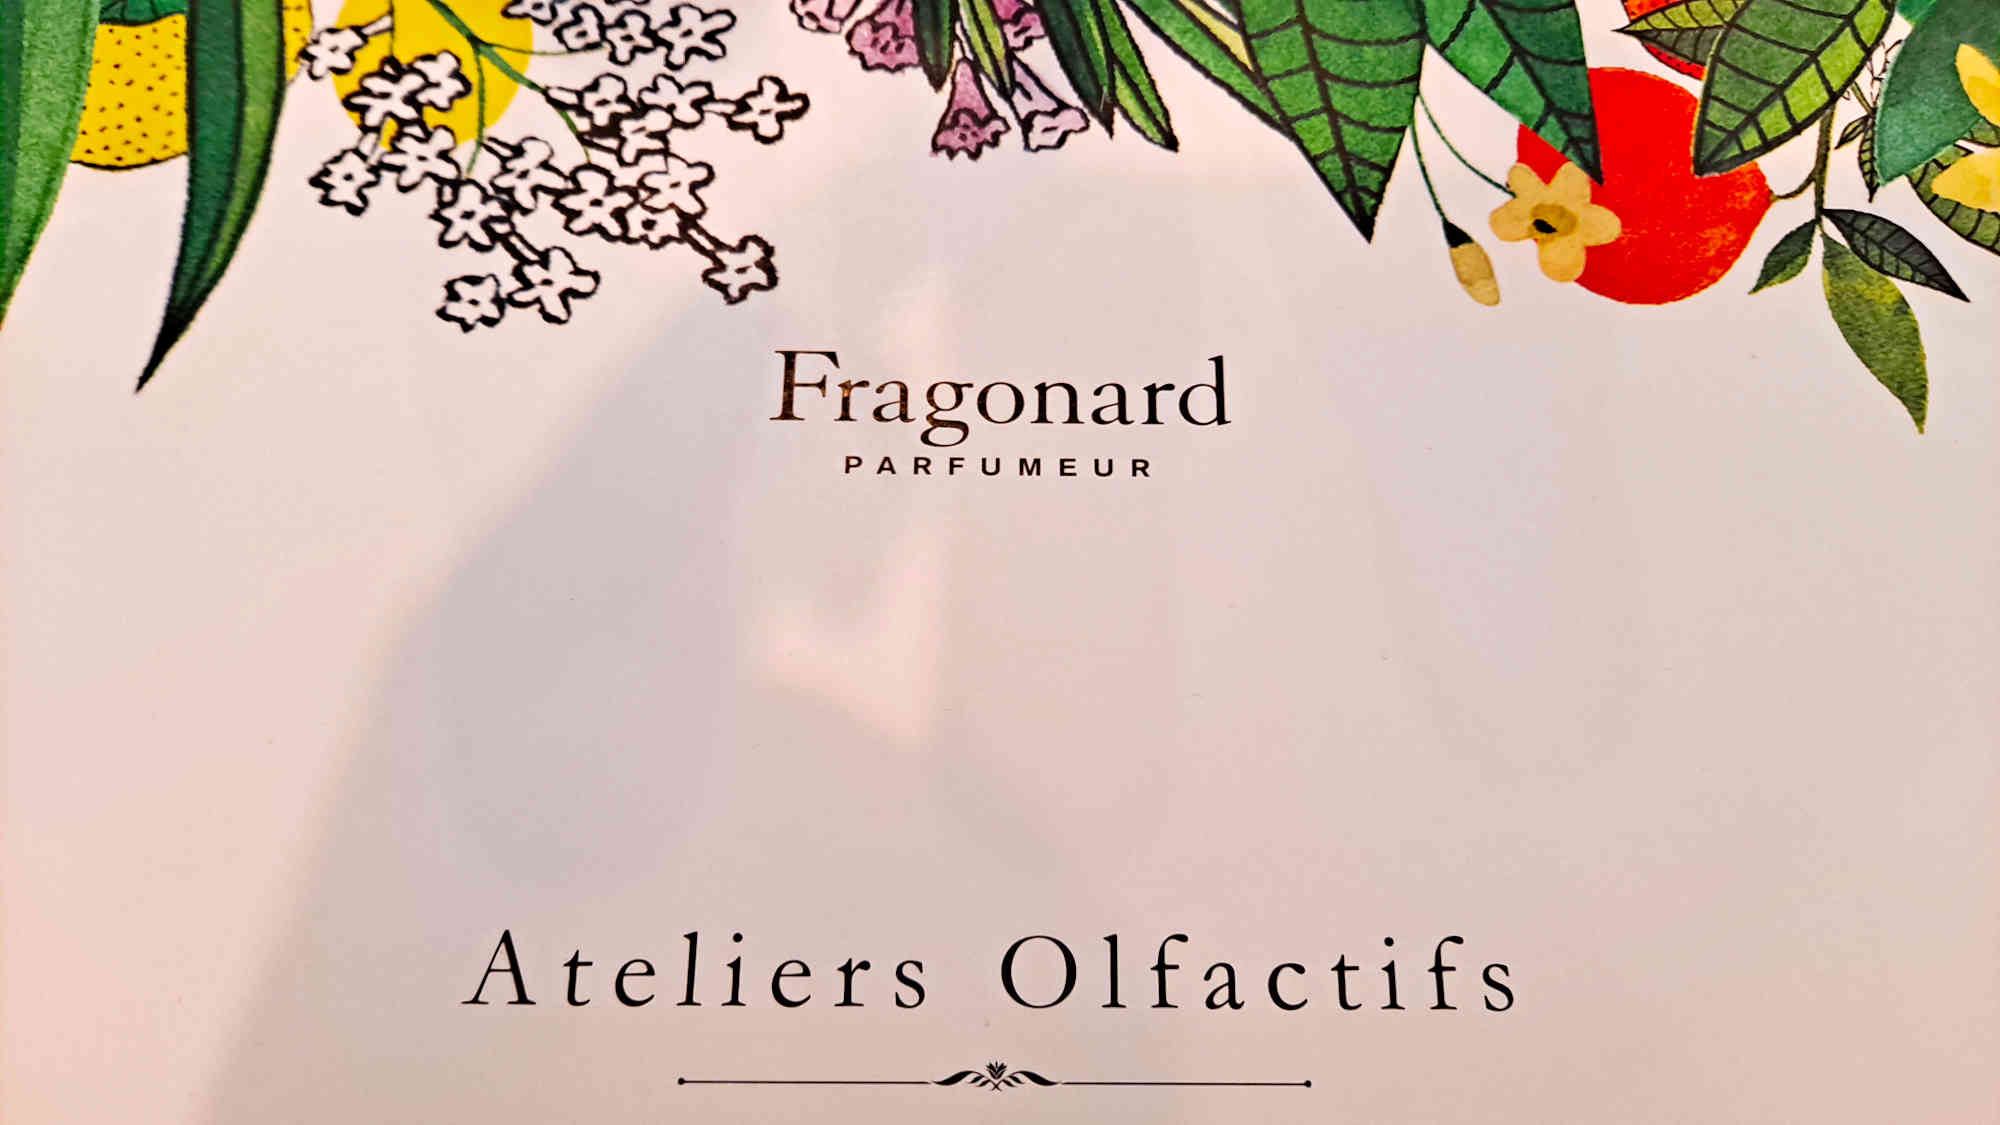 L’ATELIER OLFACTIF FRAGONARD IN GRASSE, THE EXPERIENCE NOT TO BE MISSED ON YOUR VACATION ON THE FRENCH RIVIERA